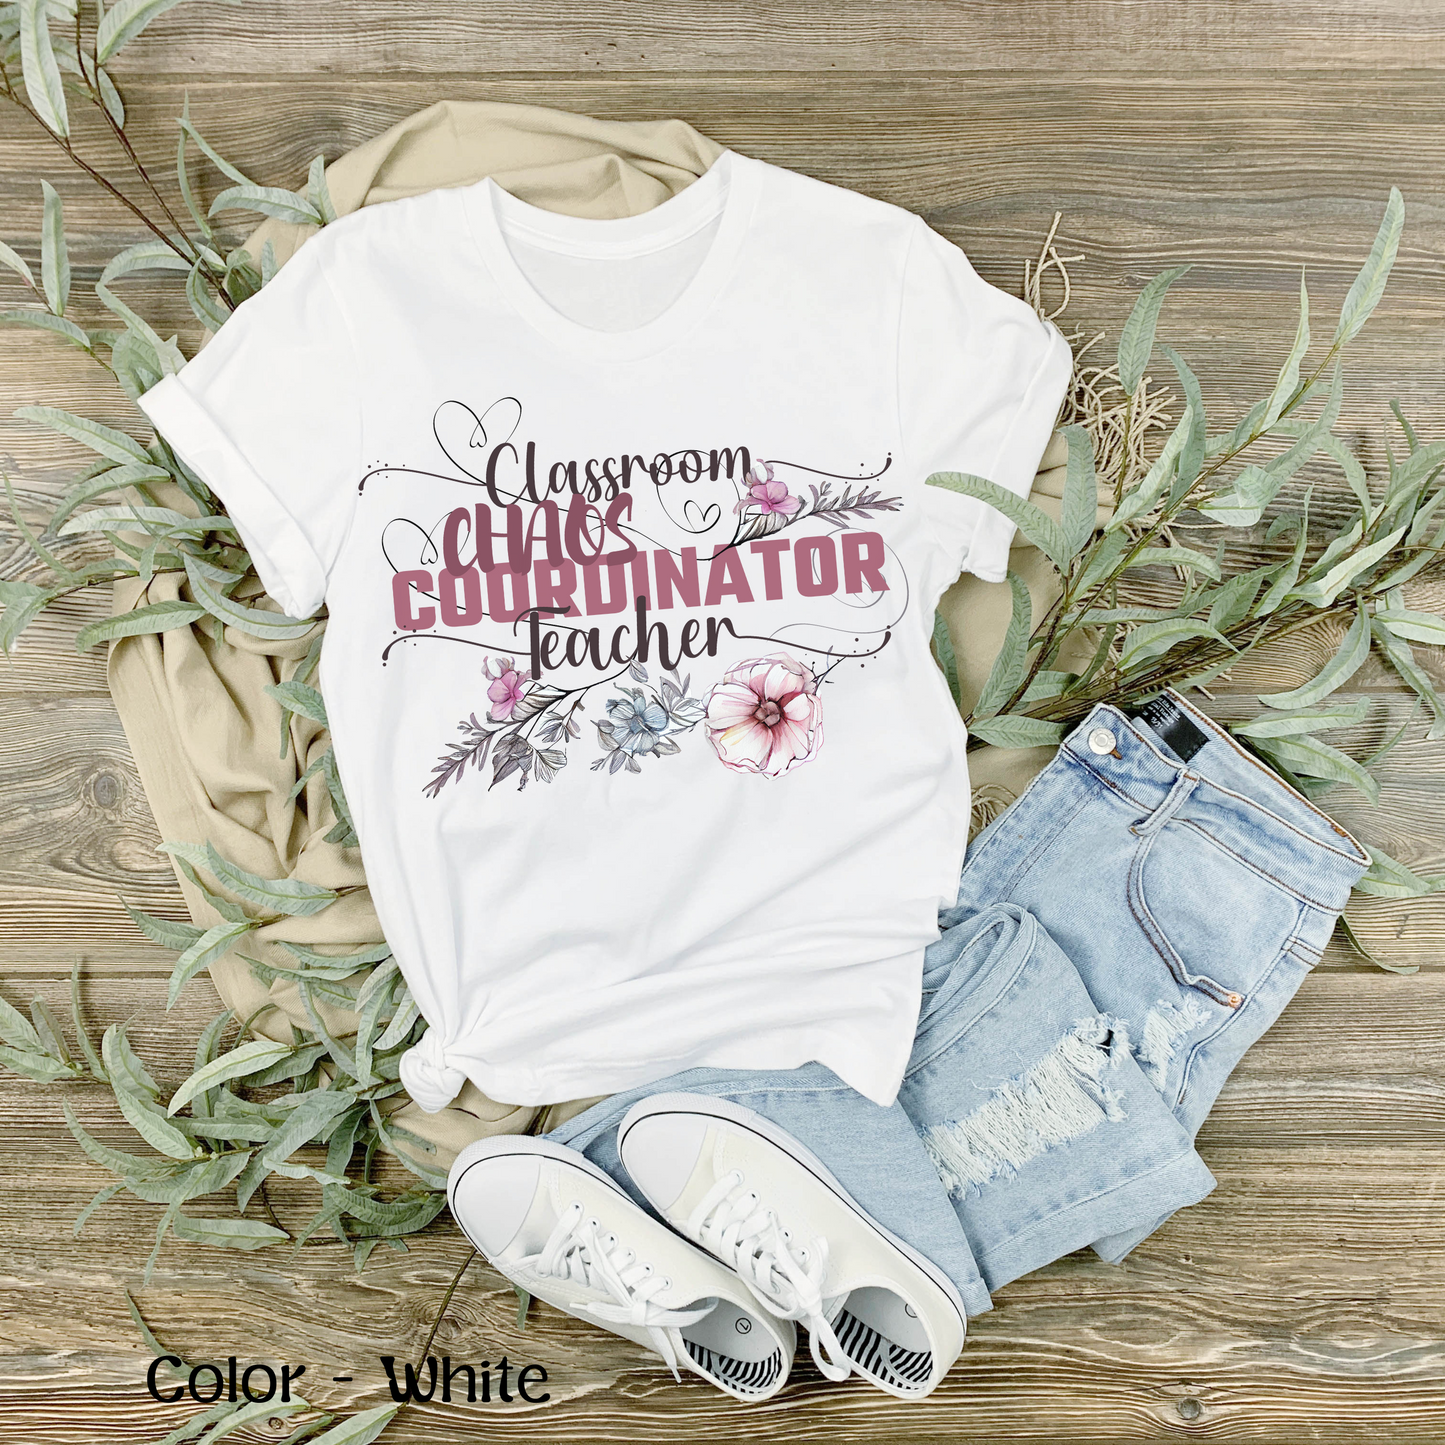 Floral Teacher TShirt Comfort Colors Shirt Gift For Her Funny Chaos Coordinator Back to School Shirt For Teachers New Teacher Gift